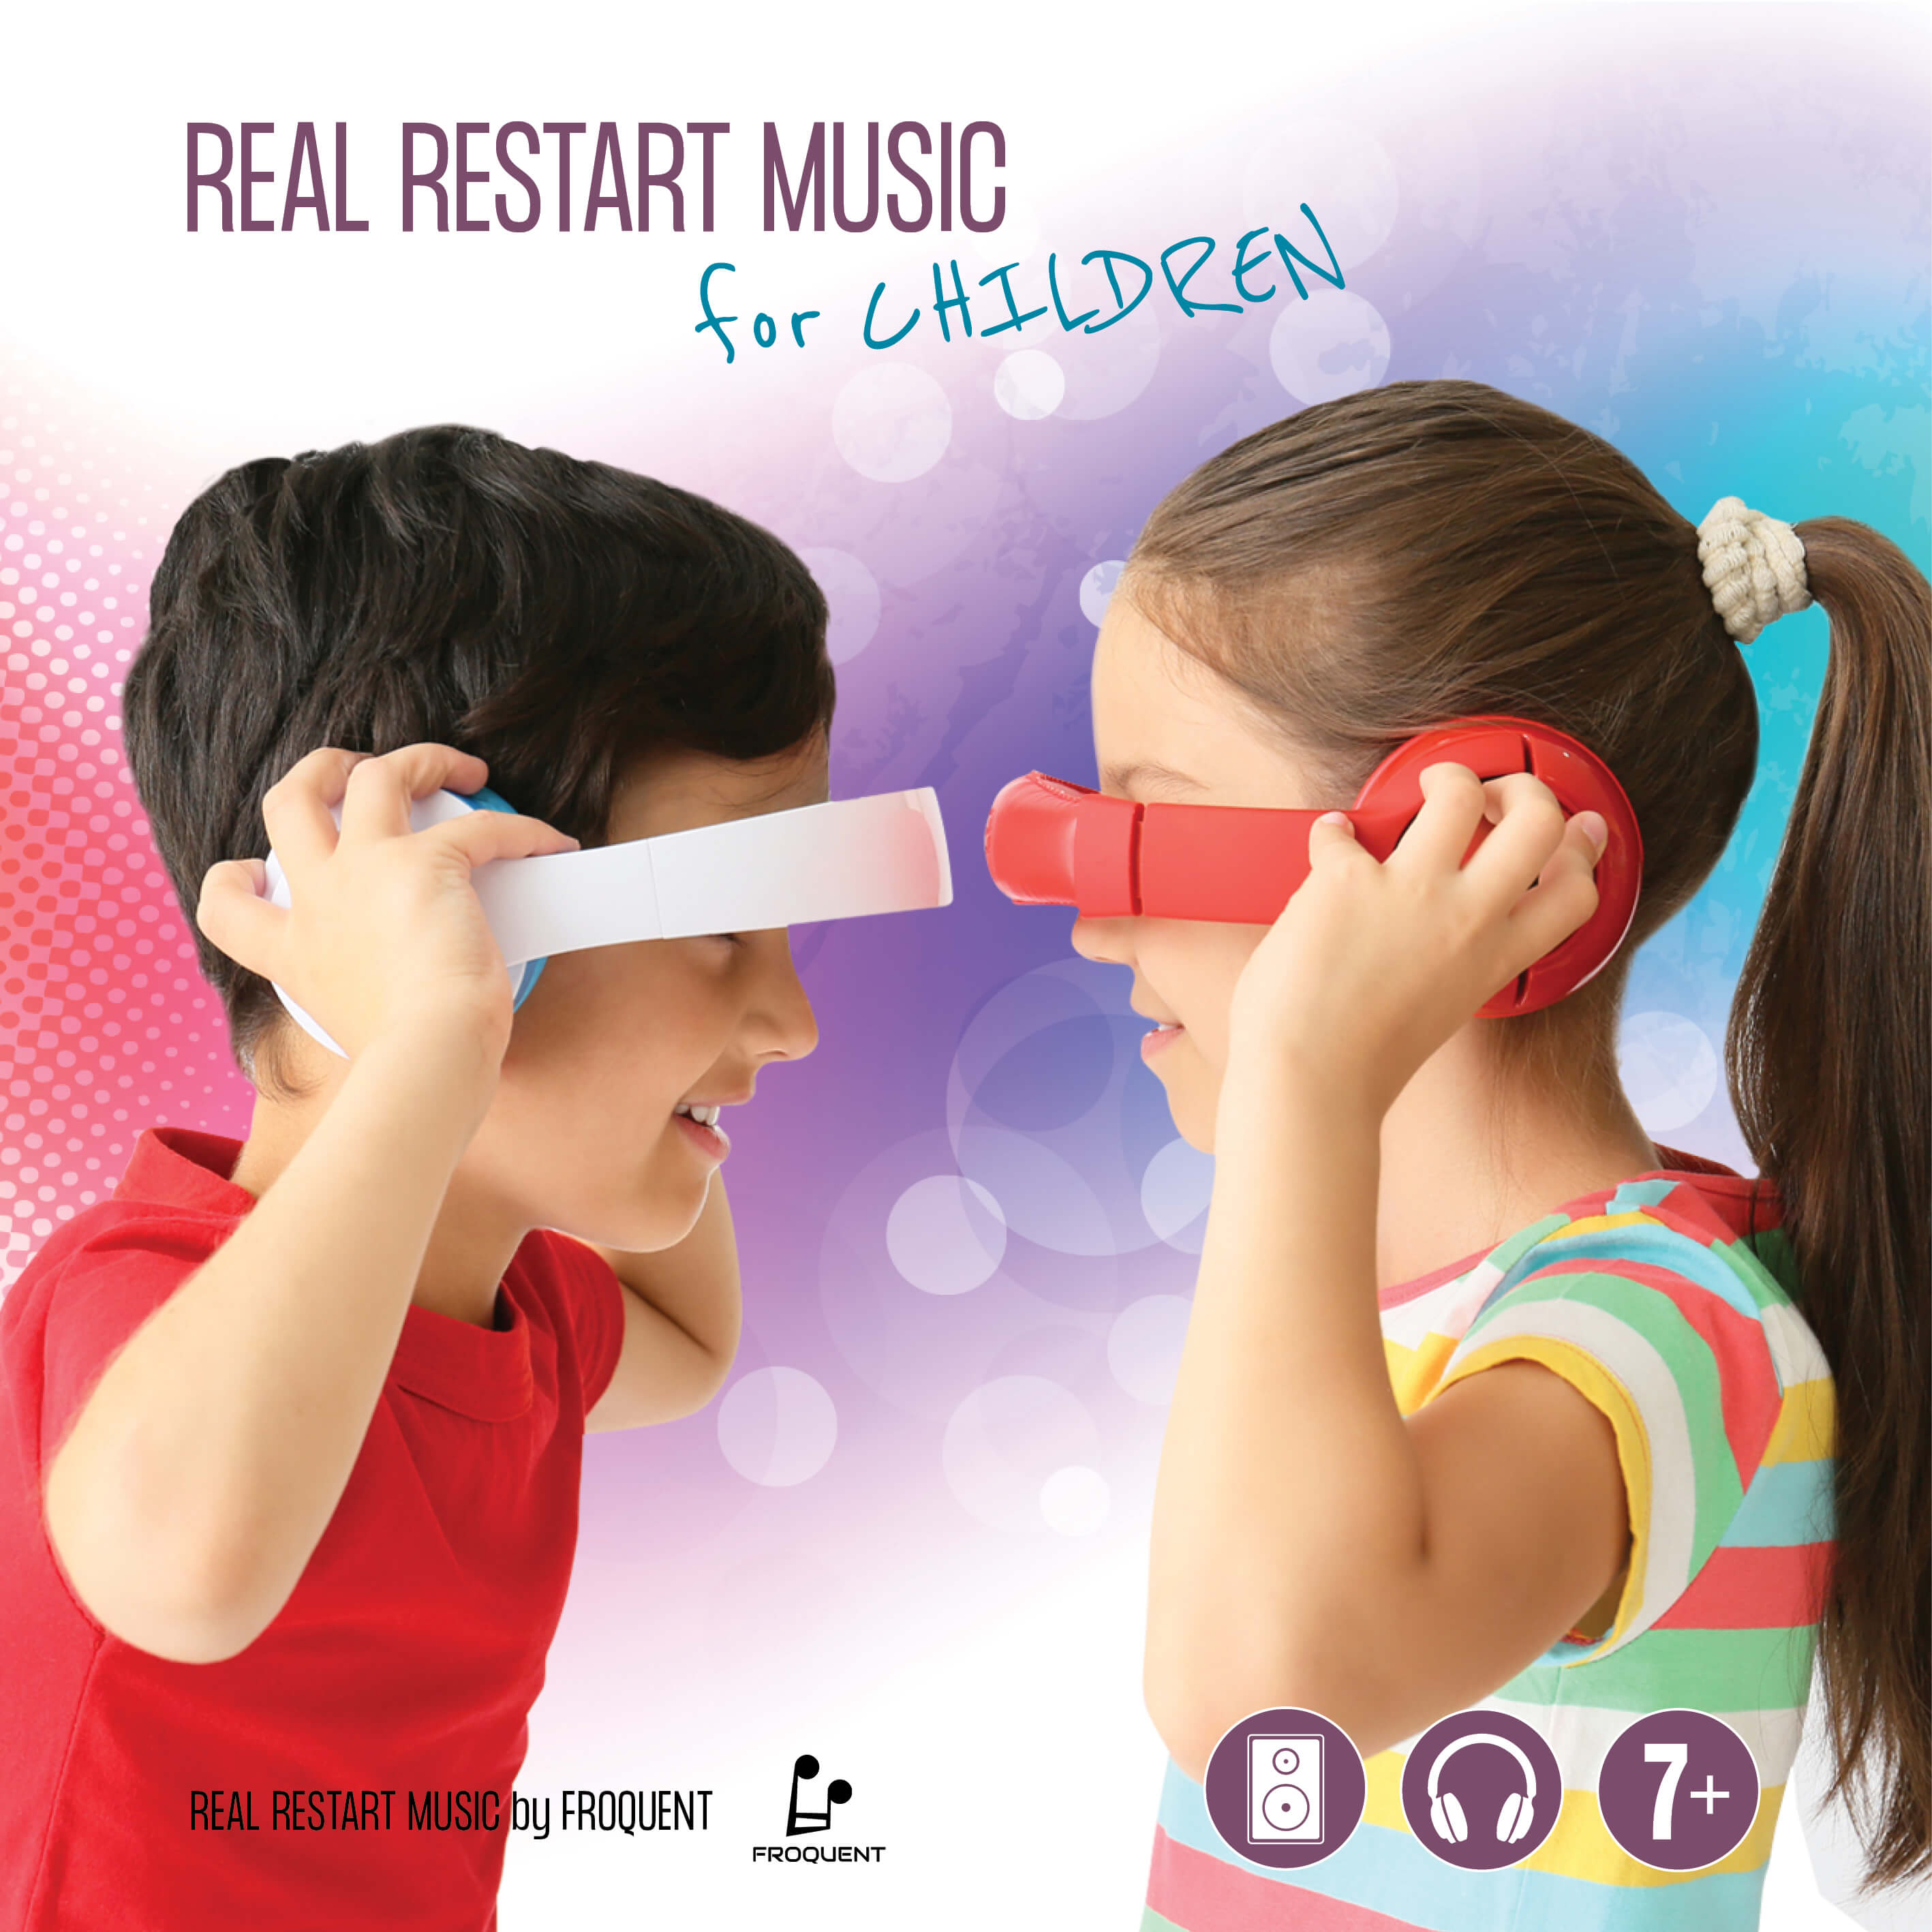 Načítať video: Youtube Album preview of REAL RESTART MUSIC FOR CHILDREN by Froquent